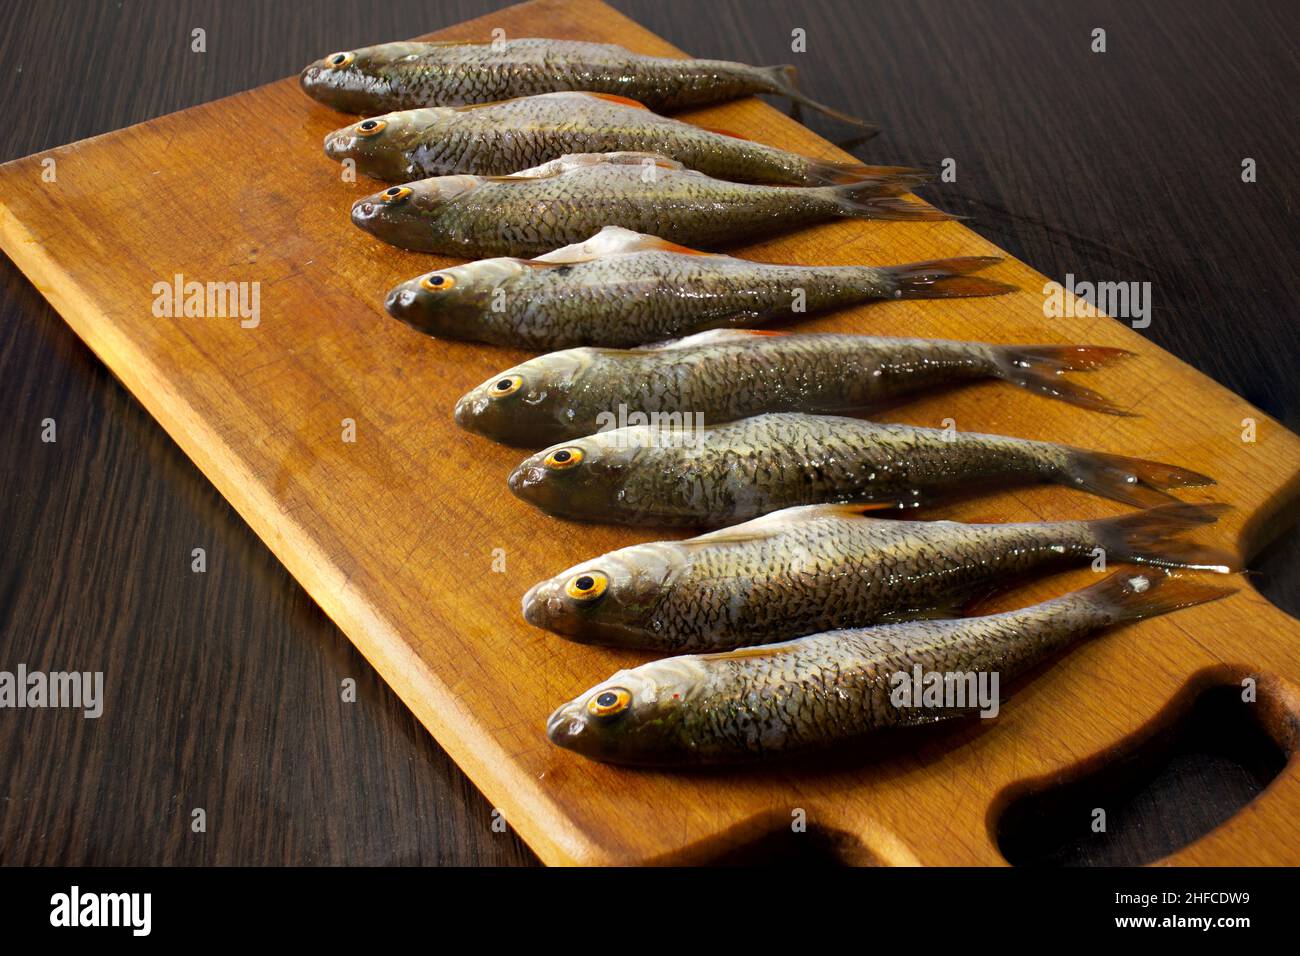 Peeled fish on the board. Fish for cooking. Stock Photo